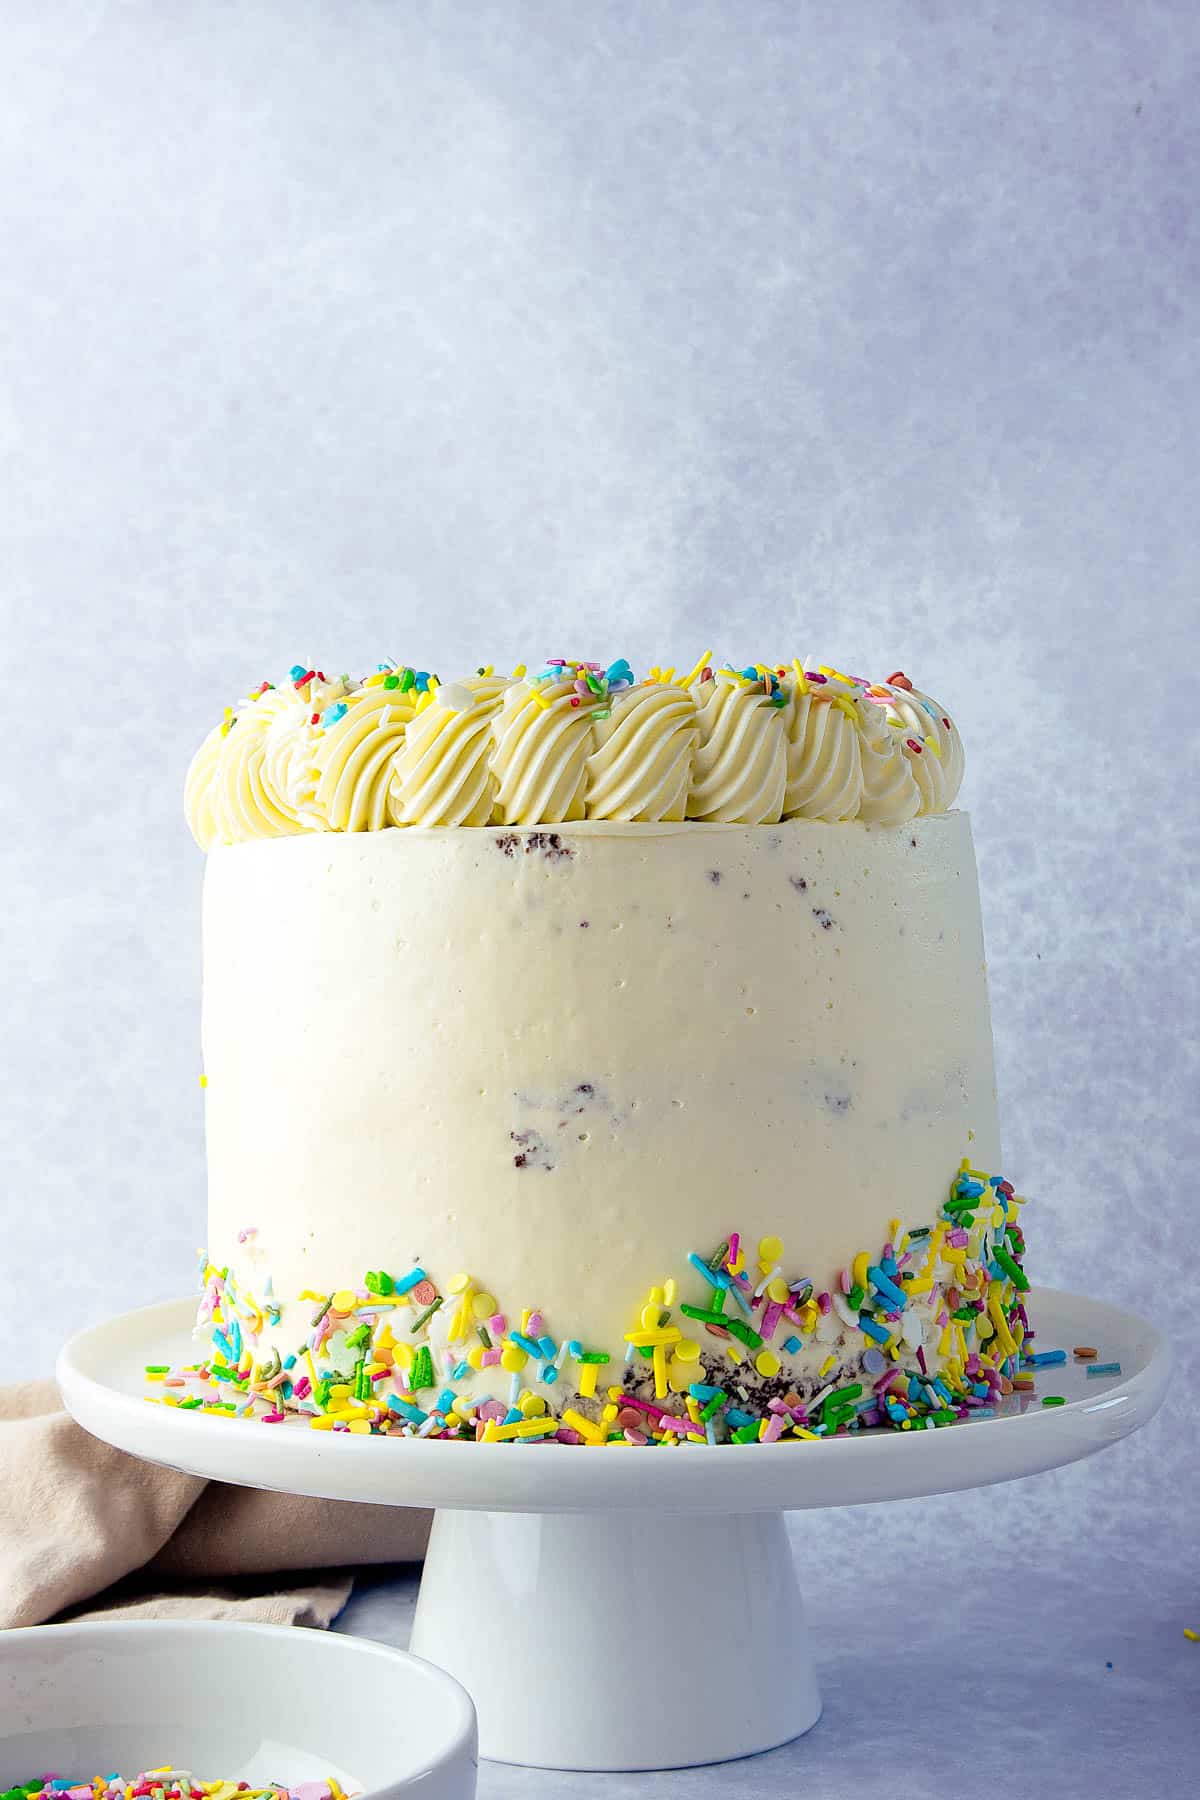 Vanilla cake iced with buttercream and stood on a white cake stand